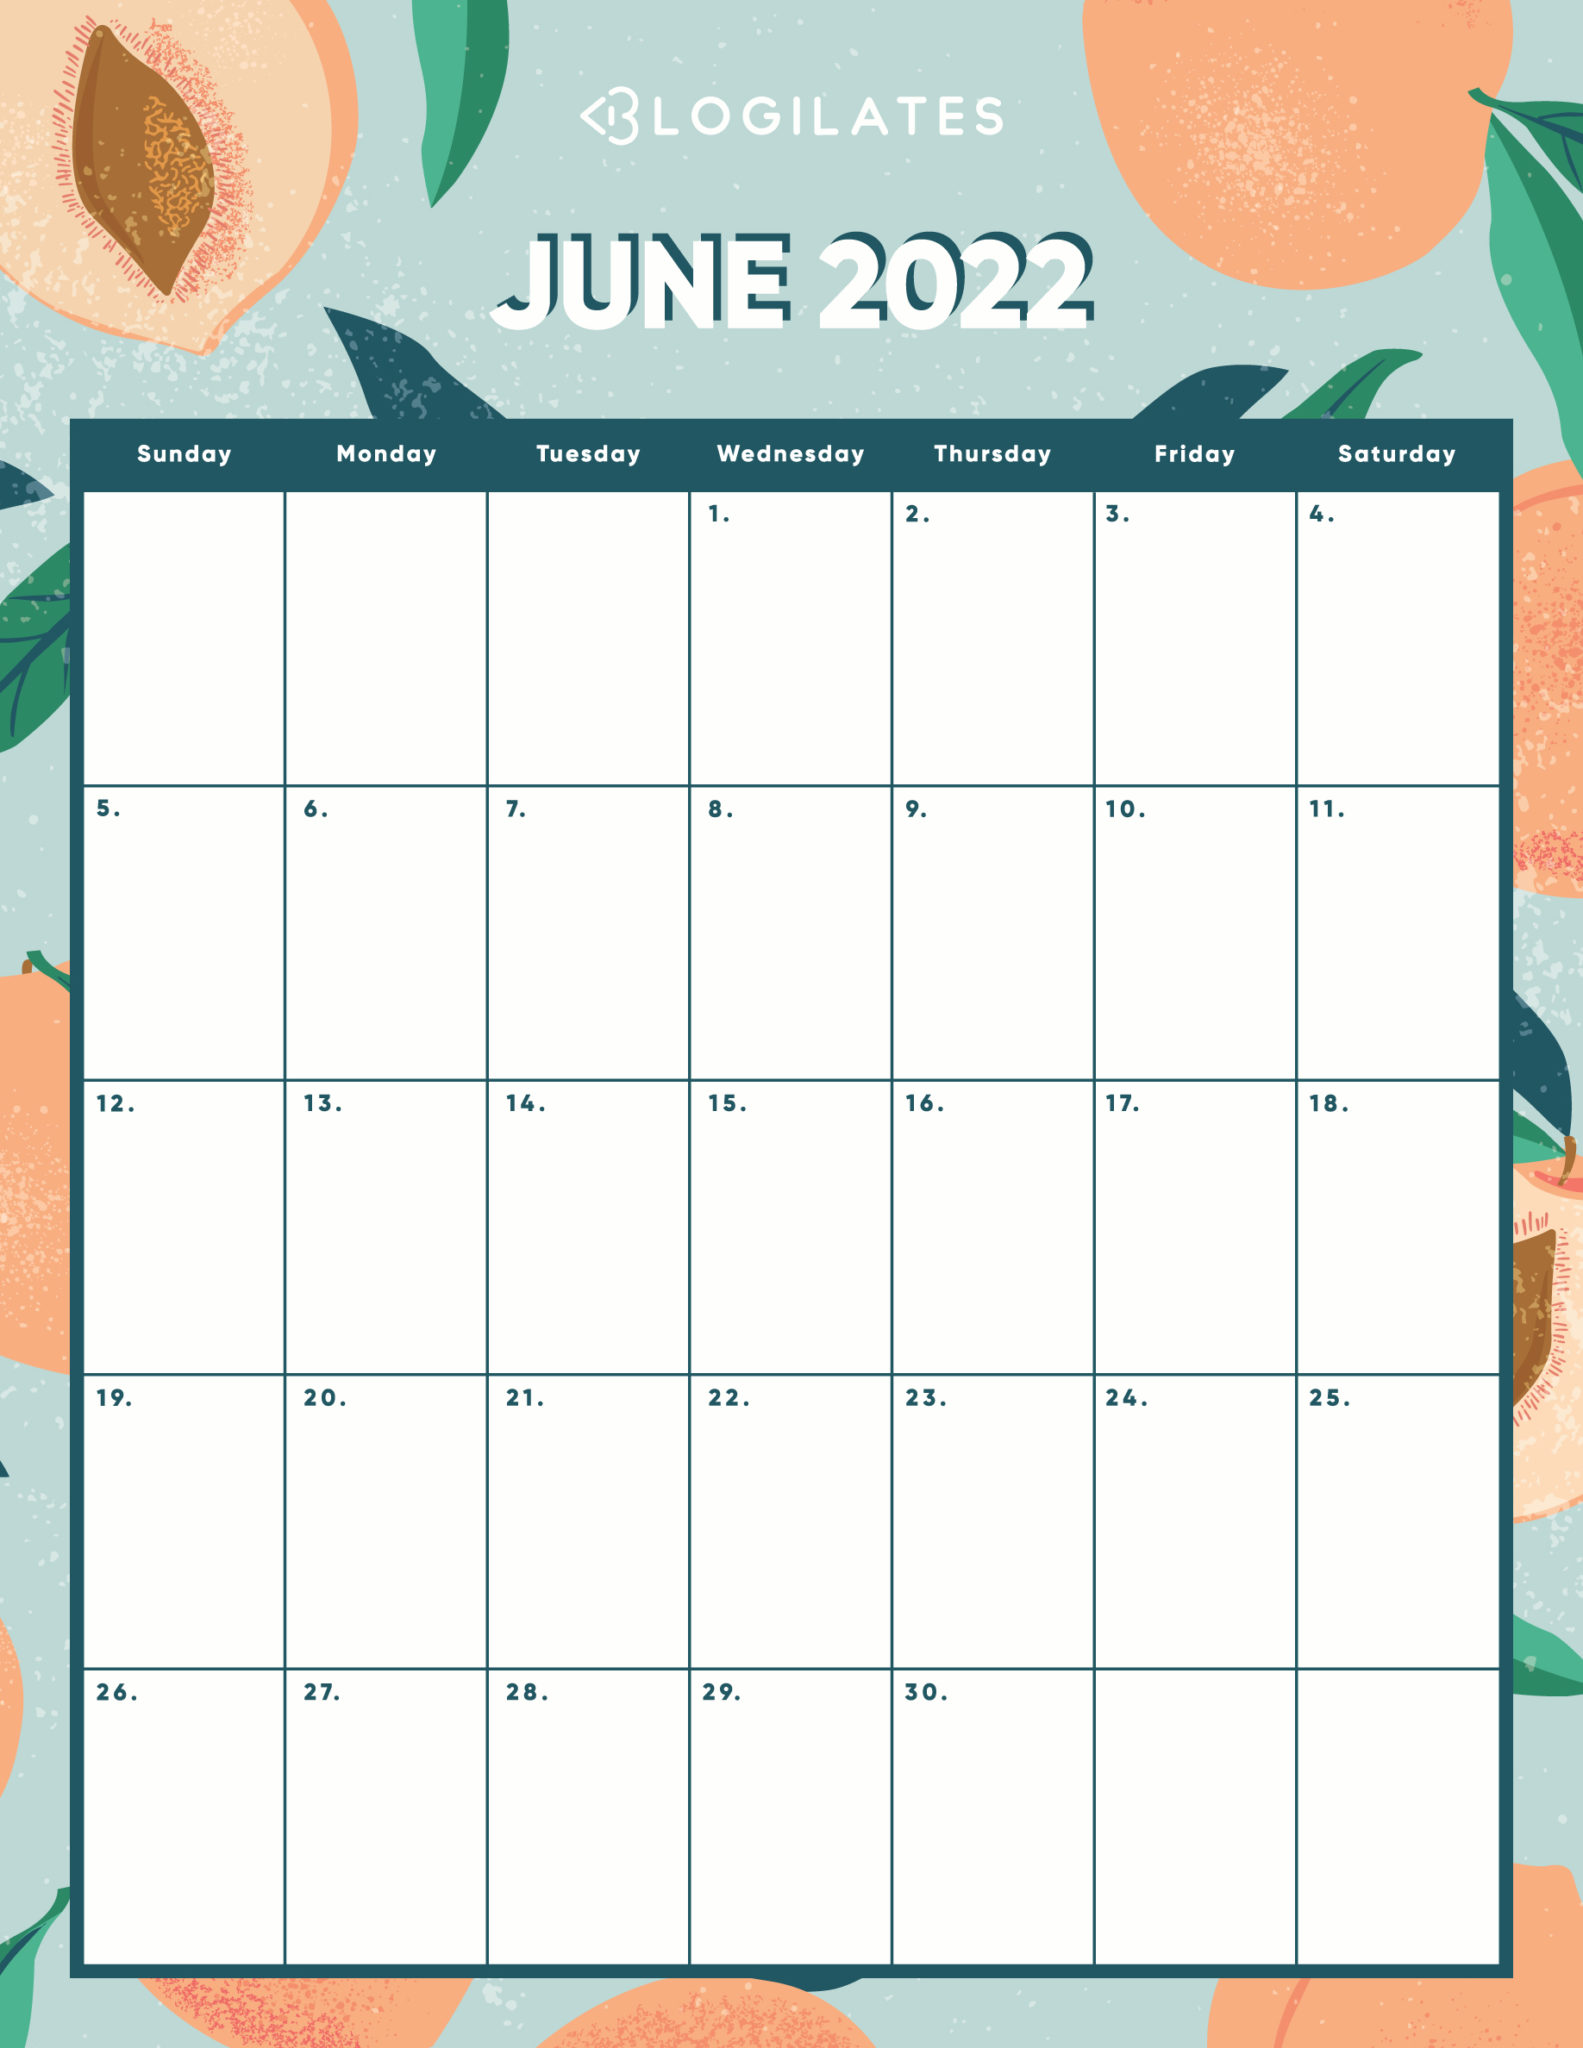 Your FREE 2022 Printable Calendars are HERE! - Blogilates